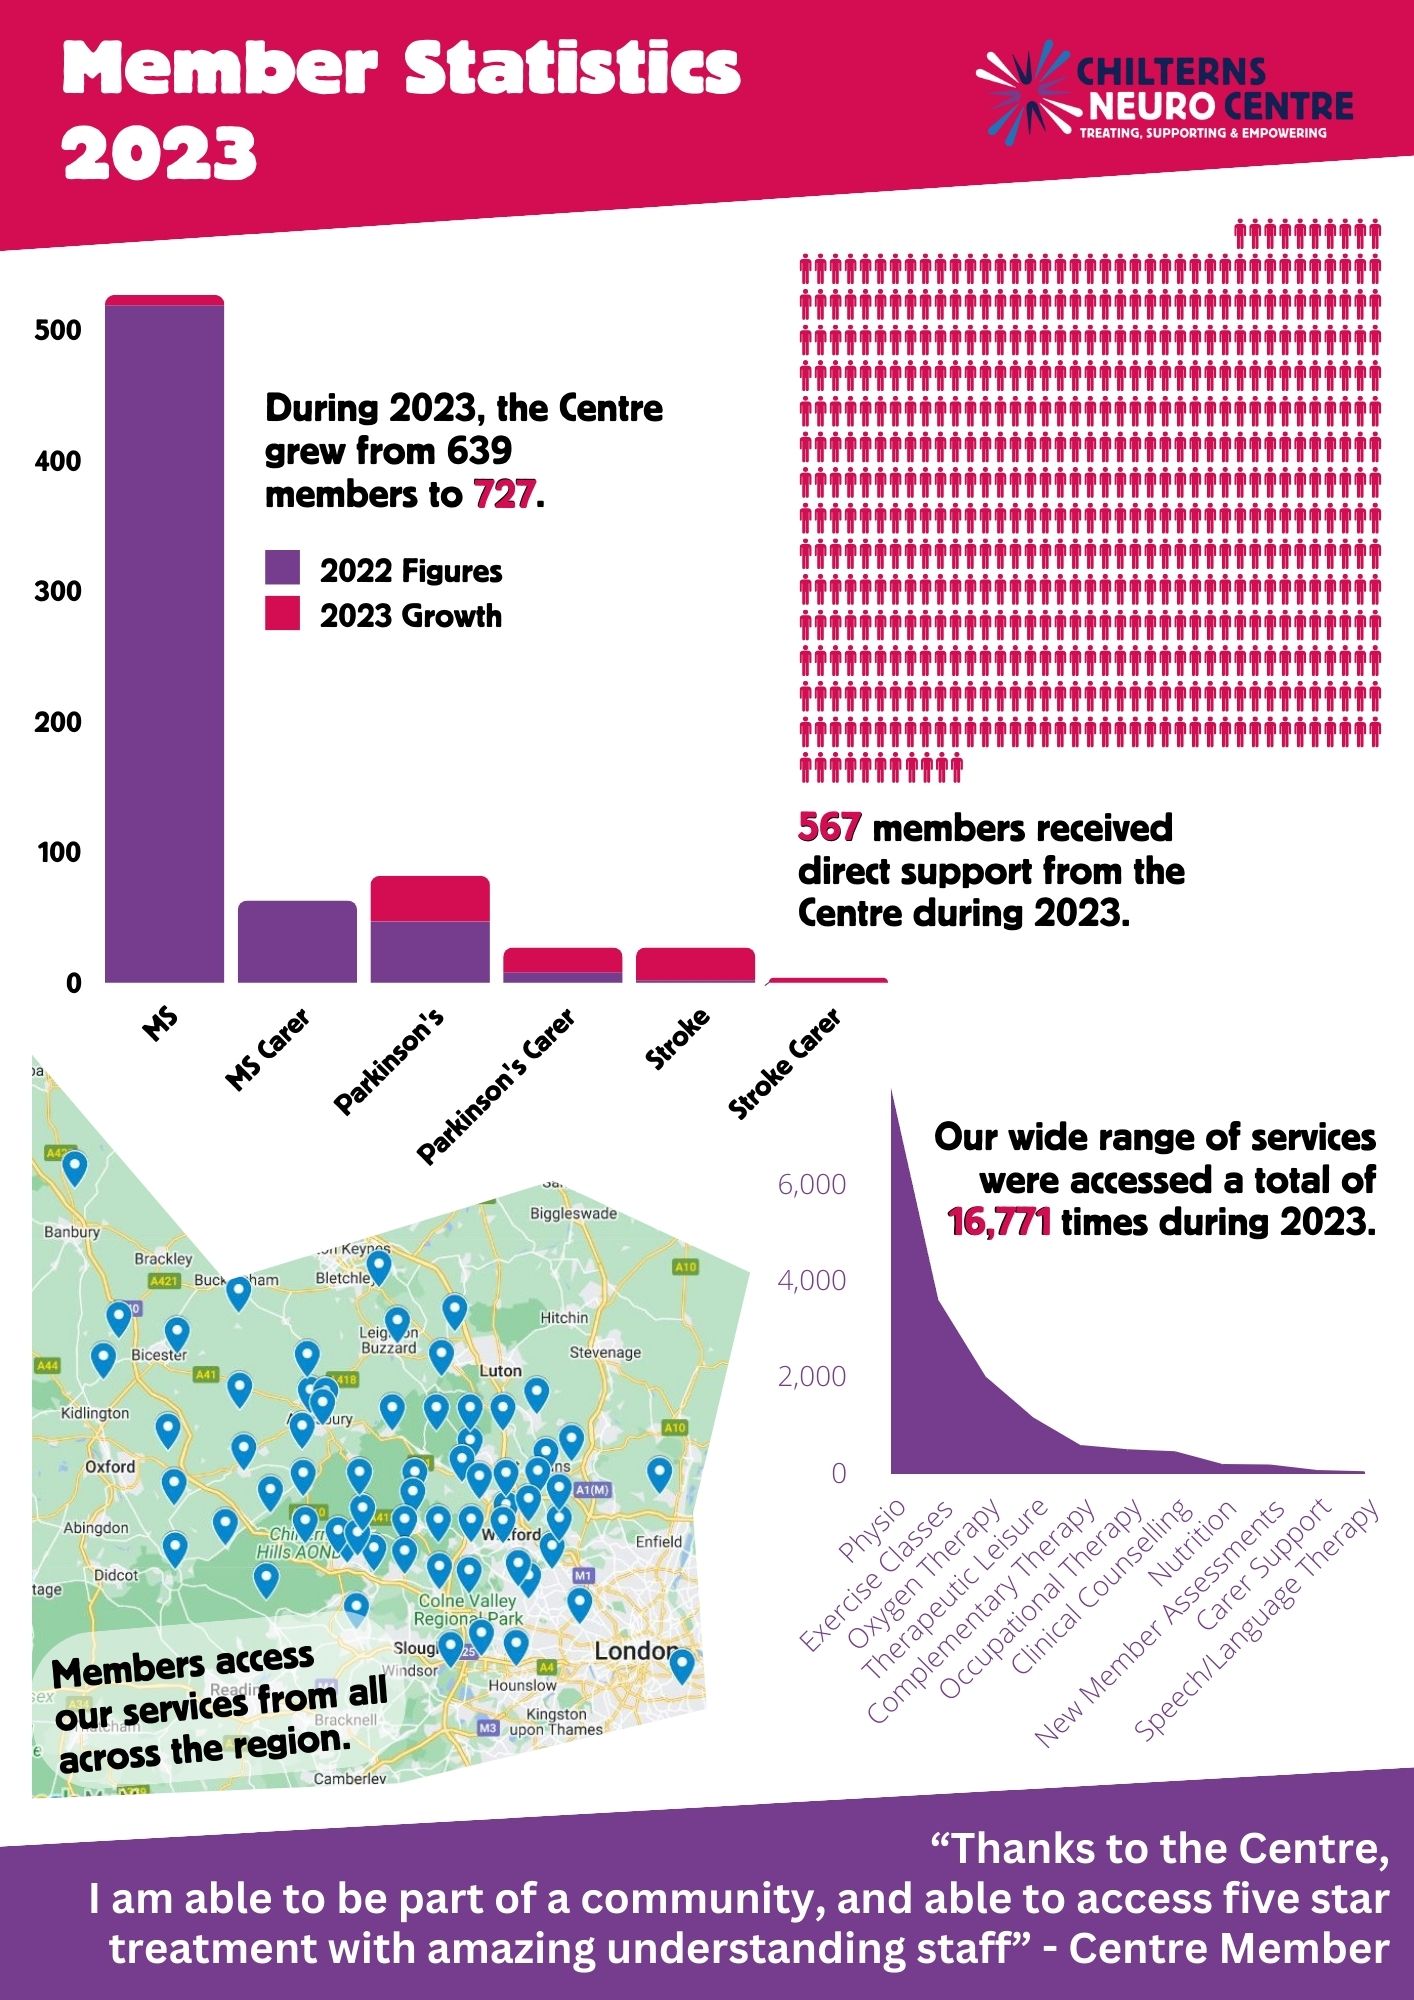 Infographic highlighting a number of figures to do with the Chilterns Neuro Centre including their membership of 727 affected by MS, Parkinson's or strokes, their direct support to 567 people during 2023, their services accessed 16,771 times during 2023 and their membership coming from across, Buckinghamshire, Hertfordshire, Berkshire and Oxfordshire.